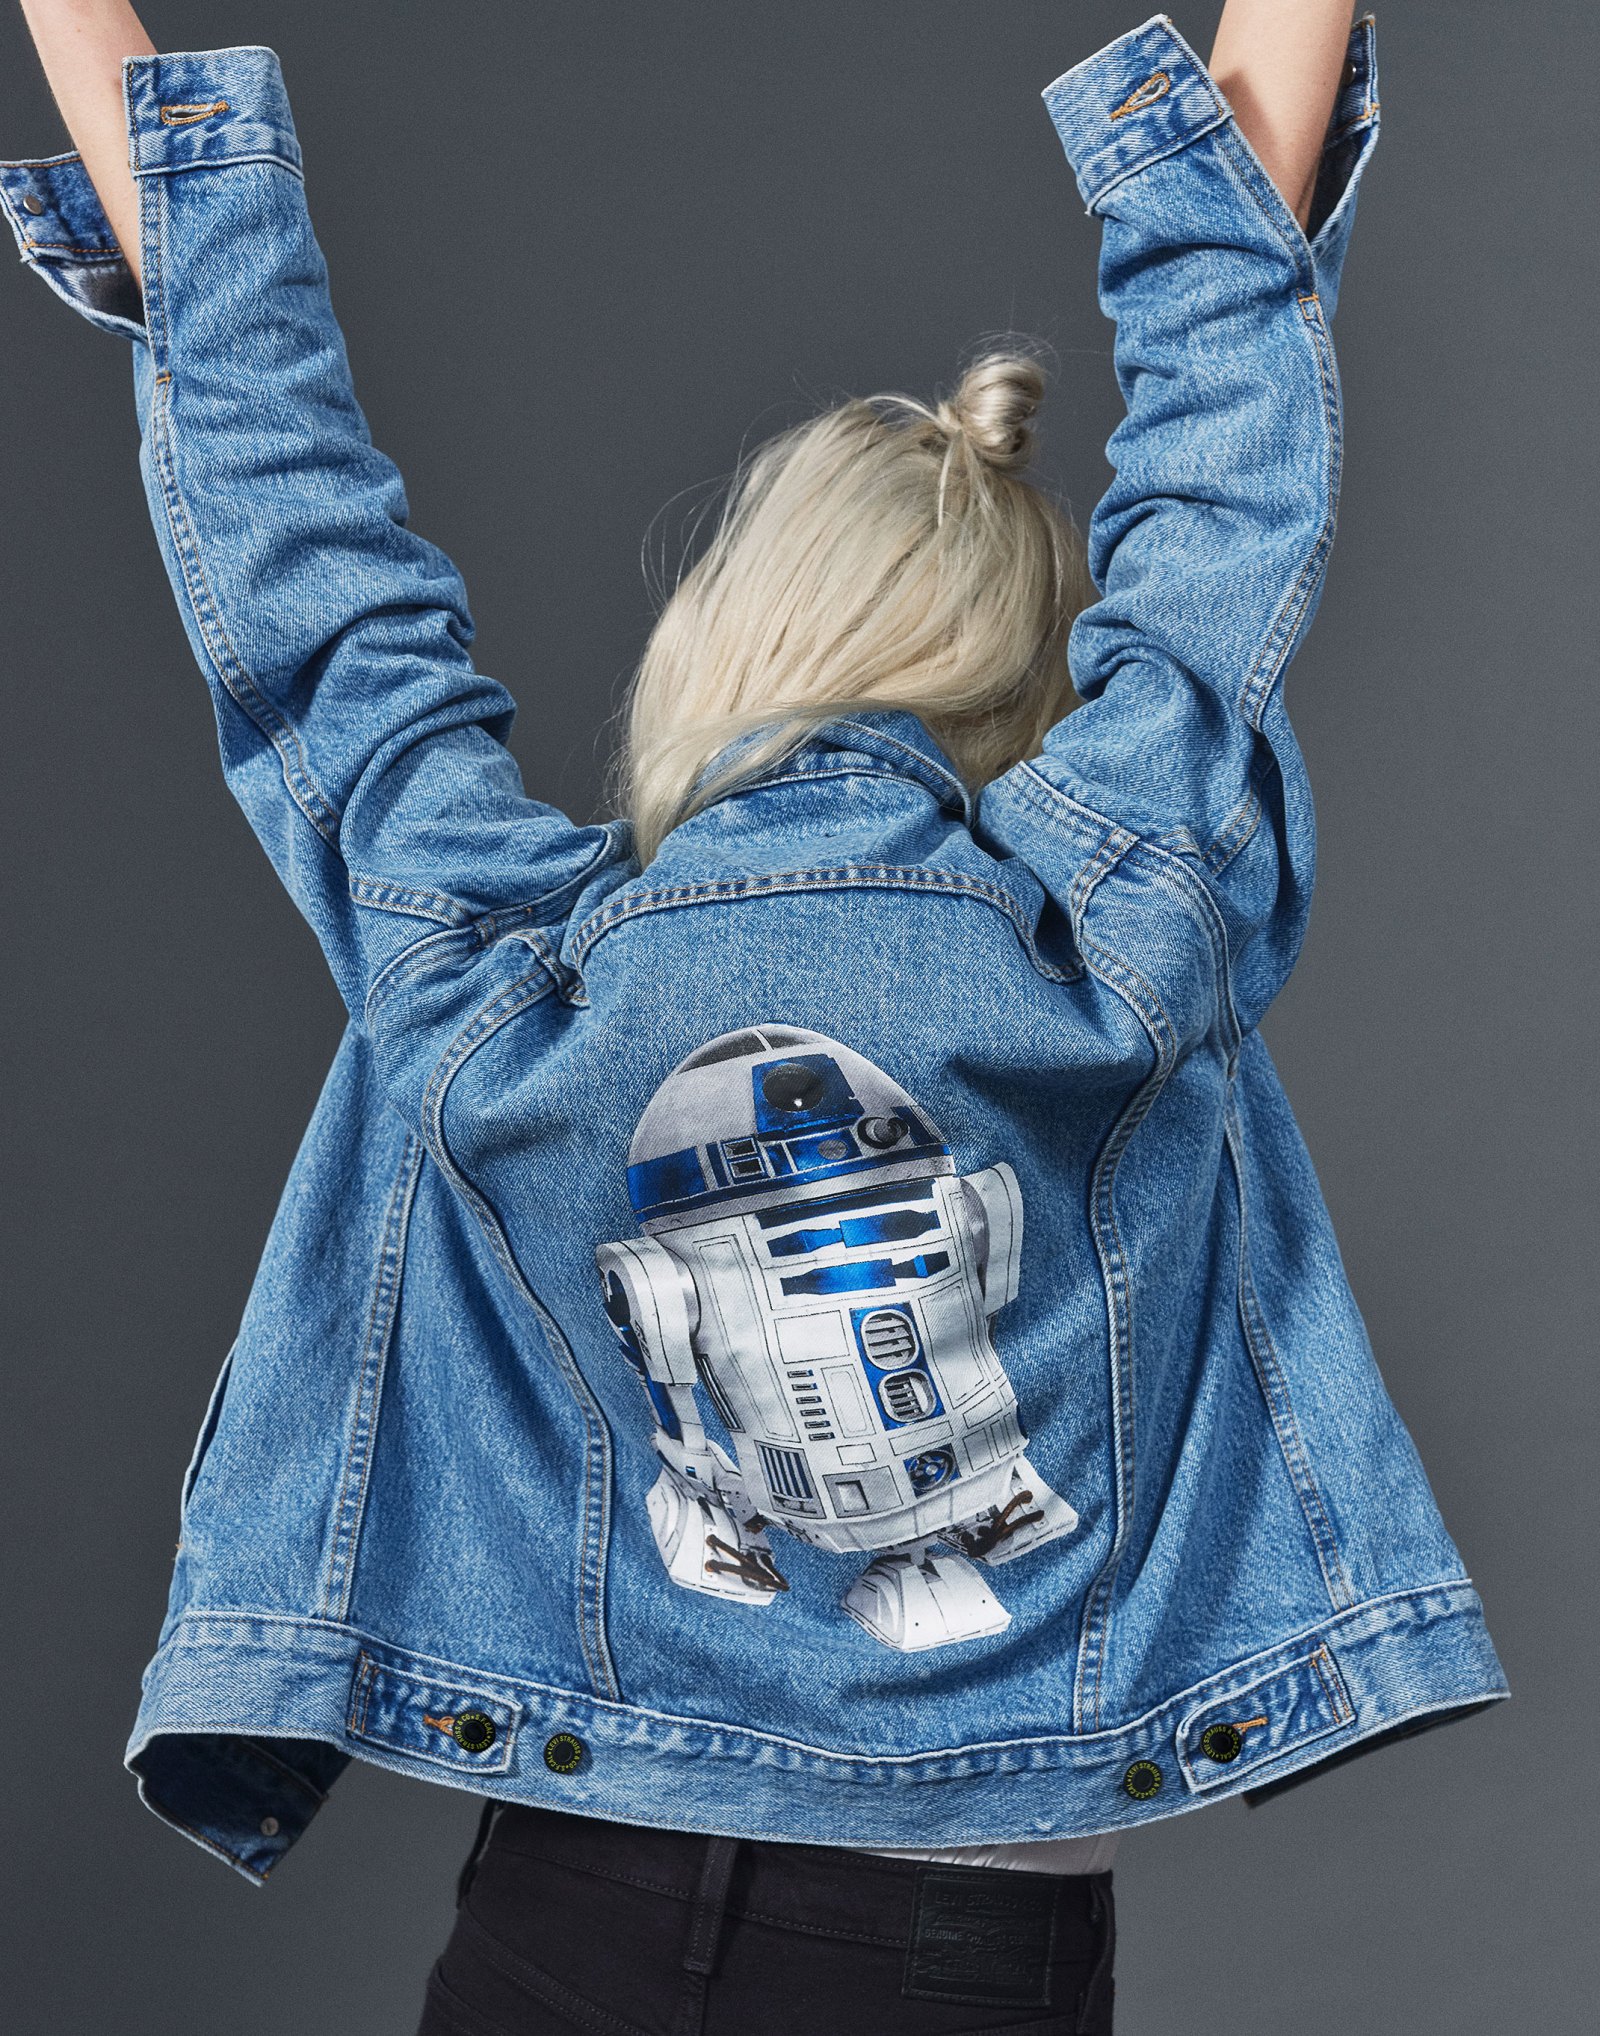 Cater Boos Gevoelig voor Levi's Unveils Limited Edition 'Star Wars' Collection 2019: Pics